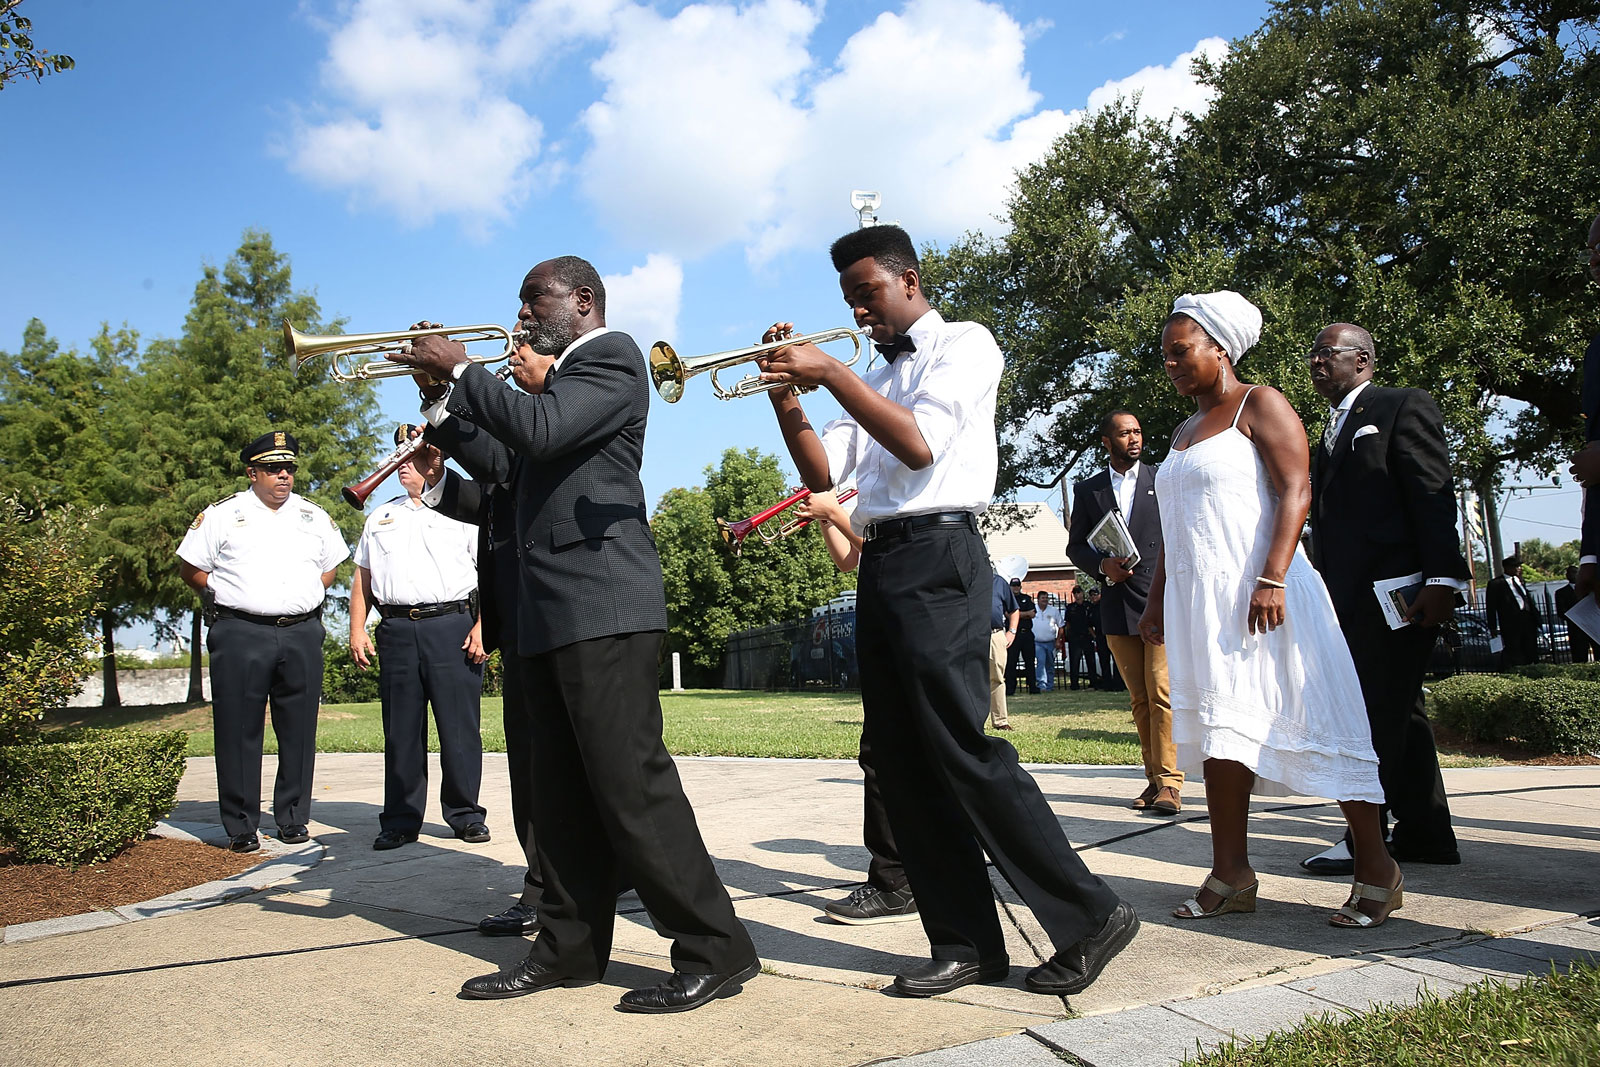 Members of a jazz funeral procession playing trumpets